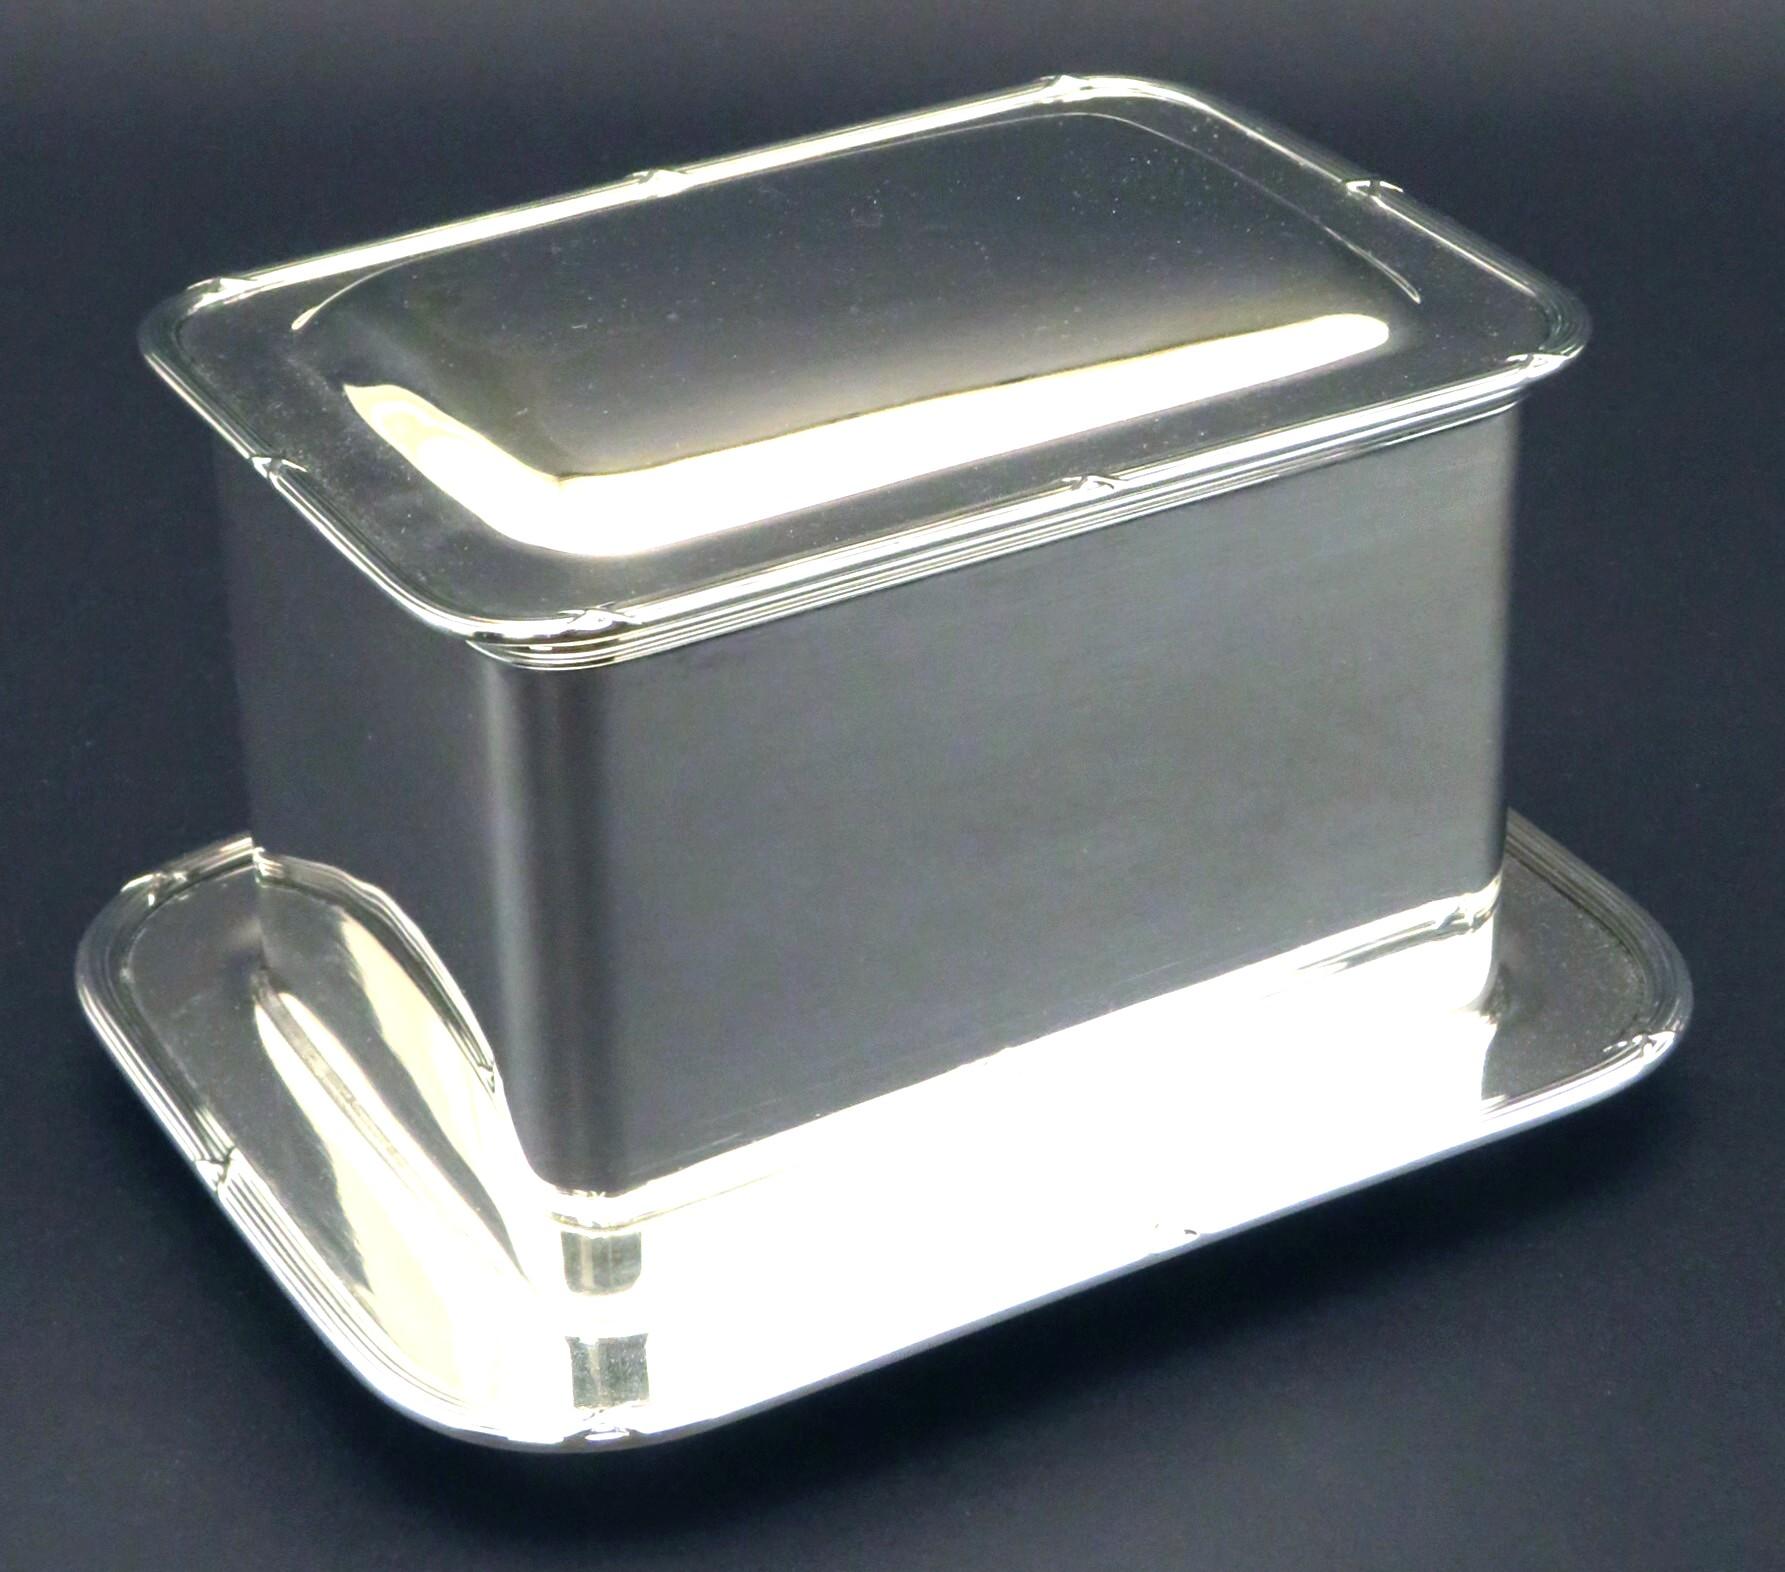 A very handsome silver plated biscuit box or humidor of timeless design, having a rectangular body with a hinged and partially domed lid trimmed with a neoclassical inspired reeded edge, overtop a conforming flat raised on four compressed bun feet.